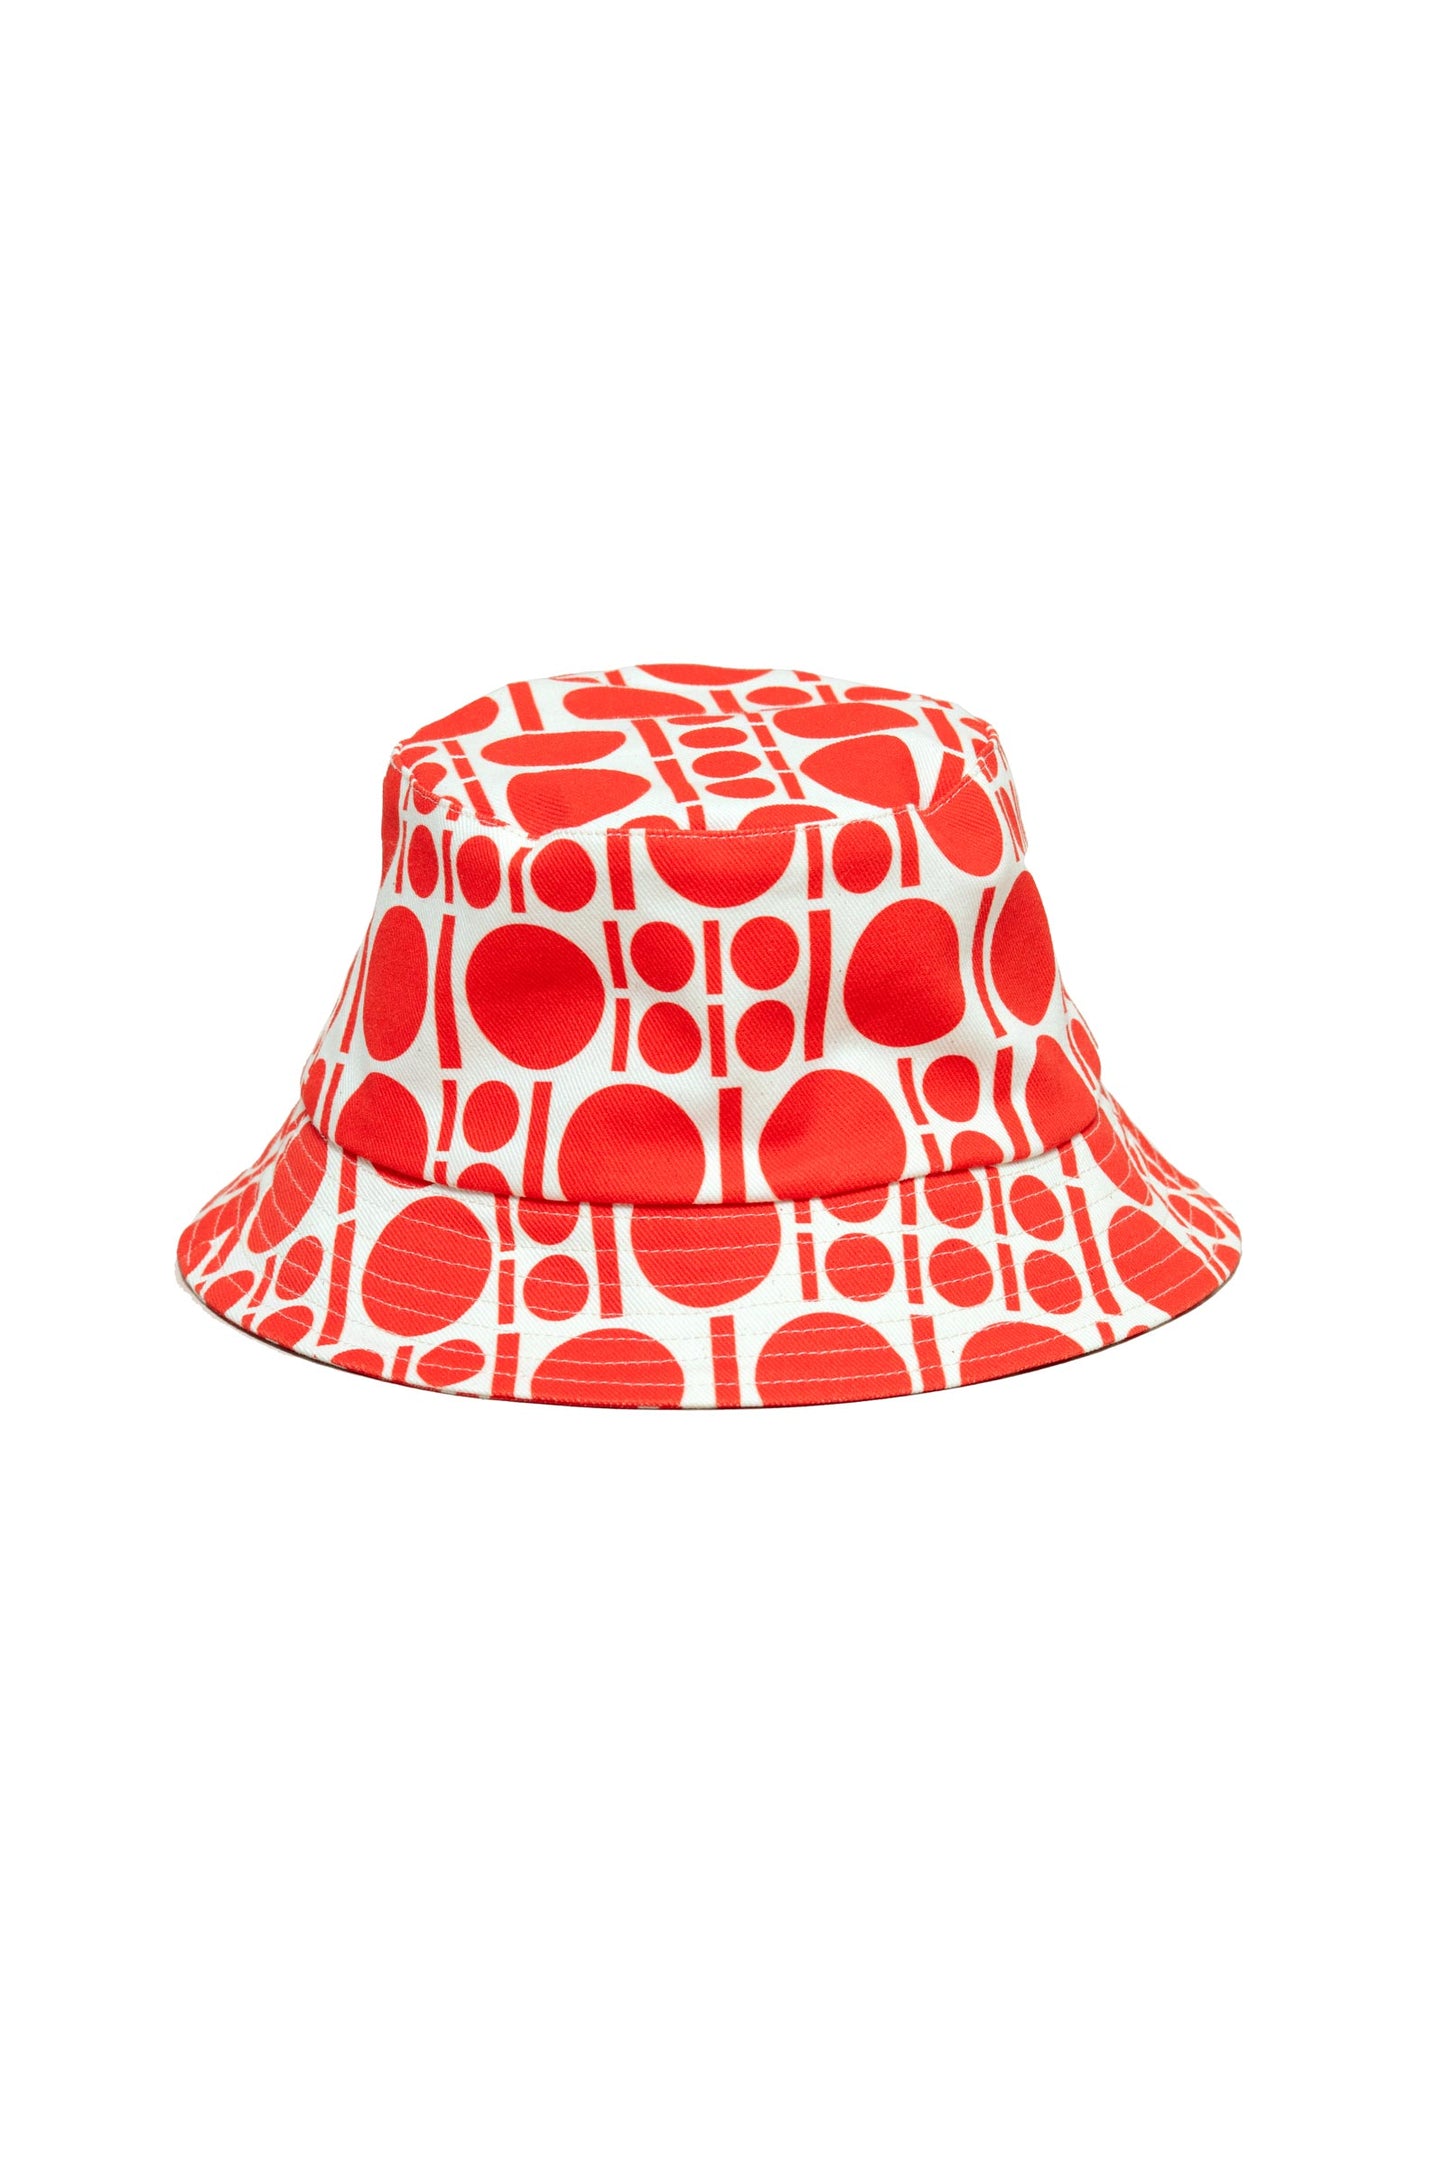 10 to 10 Bucket hat red 